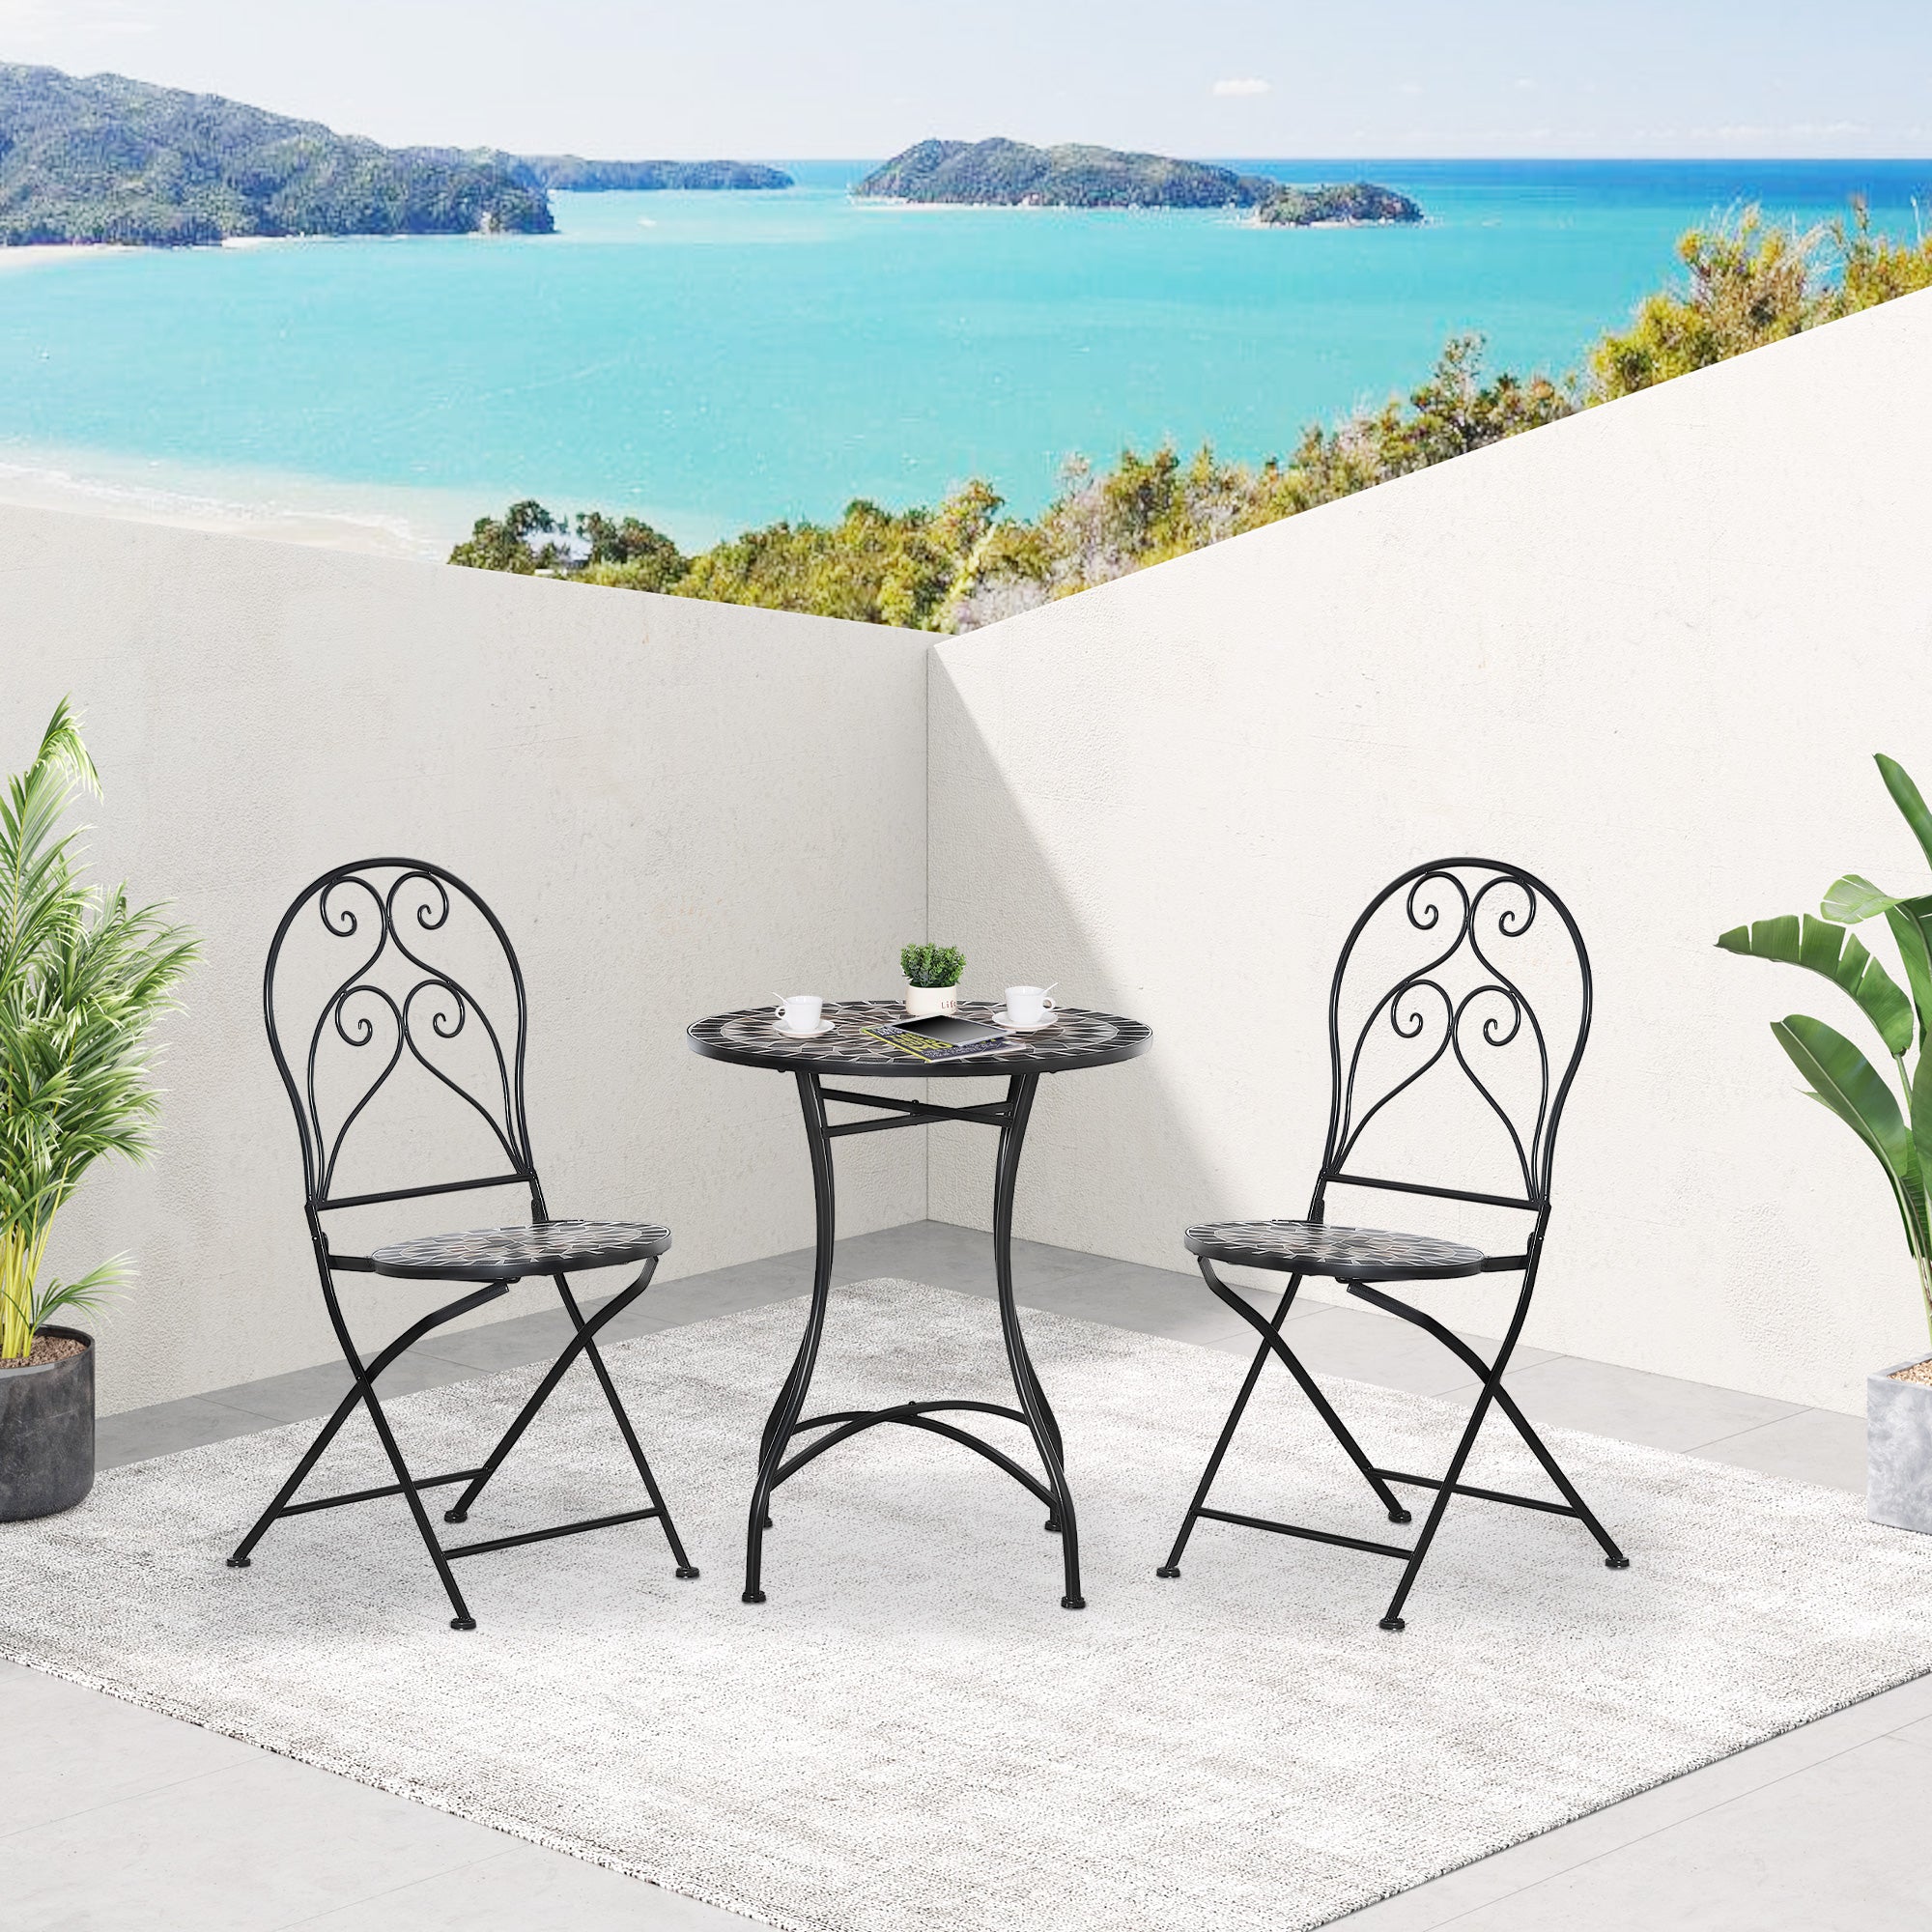 Outsunny 3 Piece Garden Outdoor Bistro Set with Coffee Table and 2 Folding Chairs, Mosaic Tile Top and Seats, Metal Frame, for Patio Balcony - Inspirely